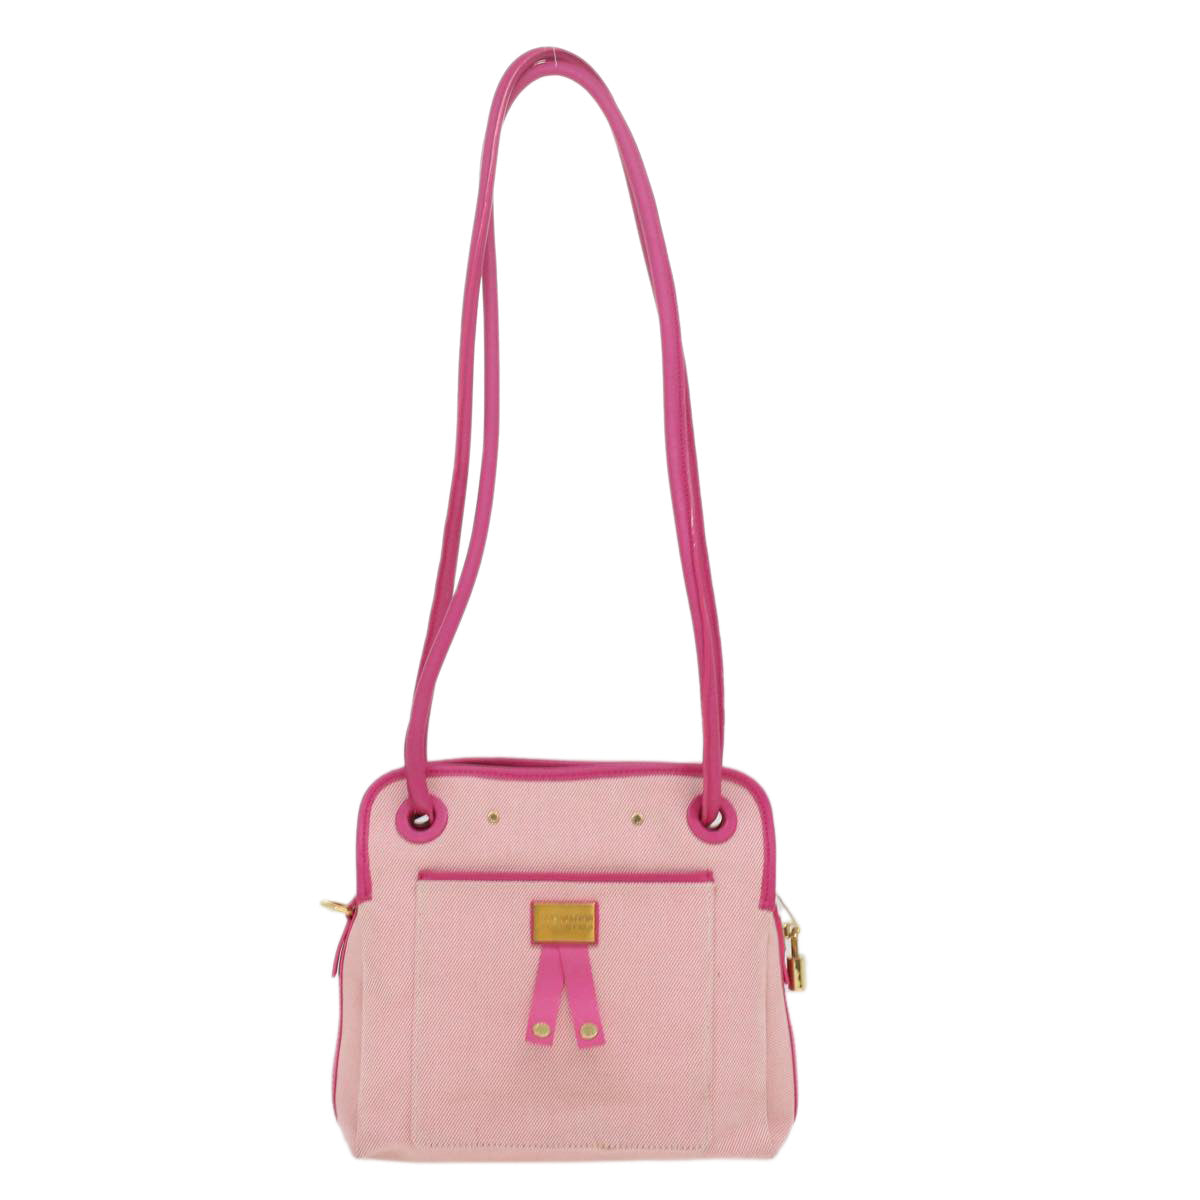 LOUIS VUITTON Rider Shoulder Bag Cruise Collection Pink M92809 LV Auth bs3776